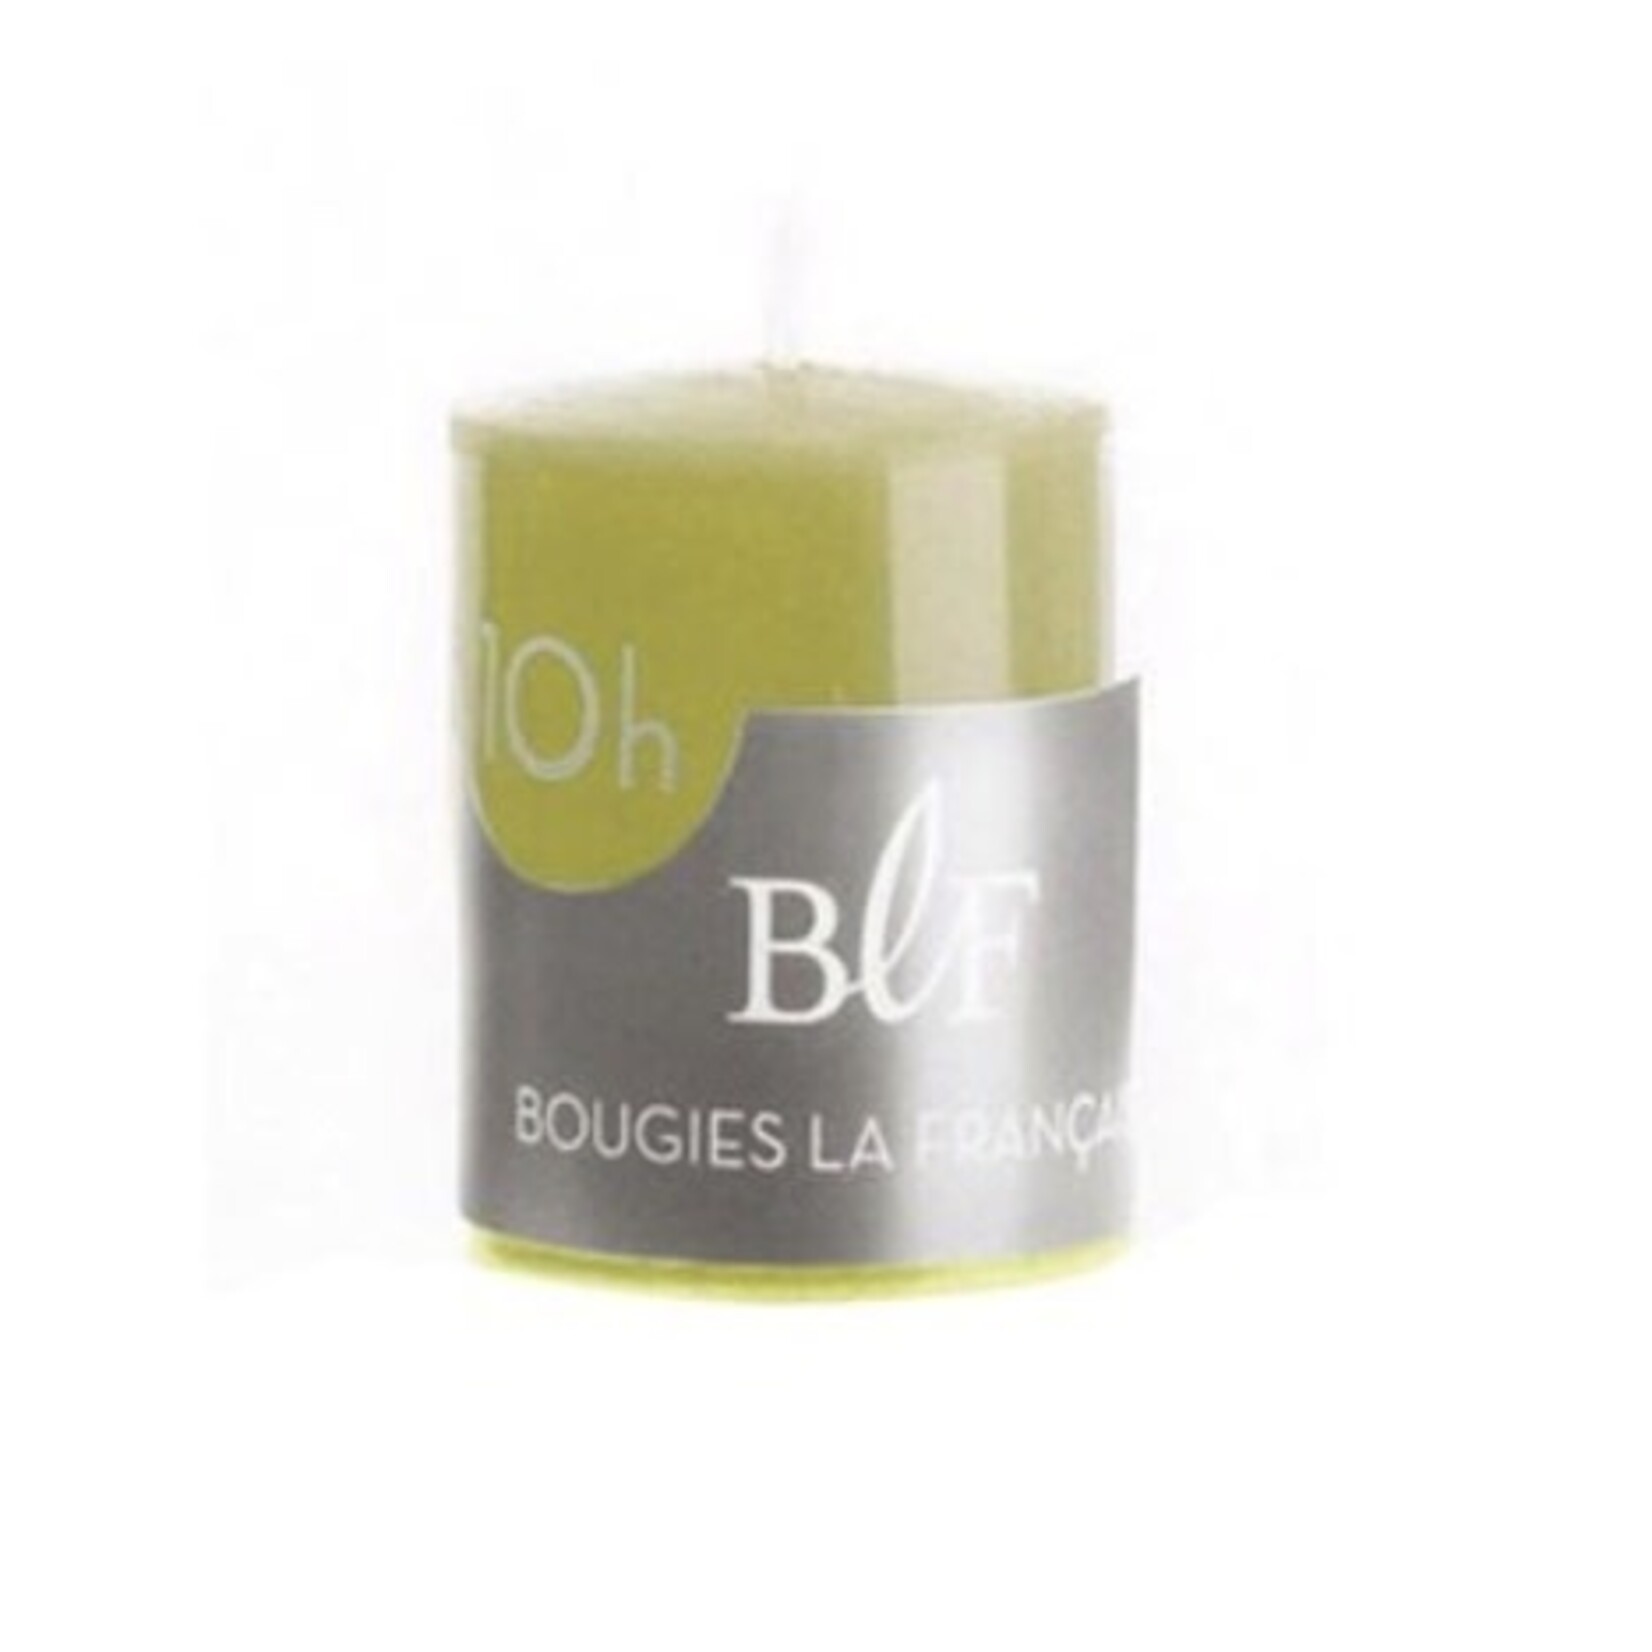 Bougie La Francaise Olive Green 10h Candle